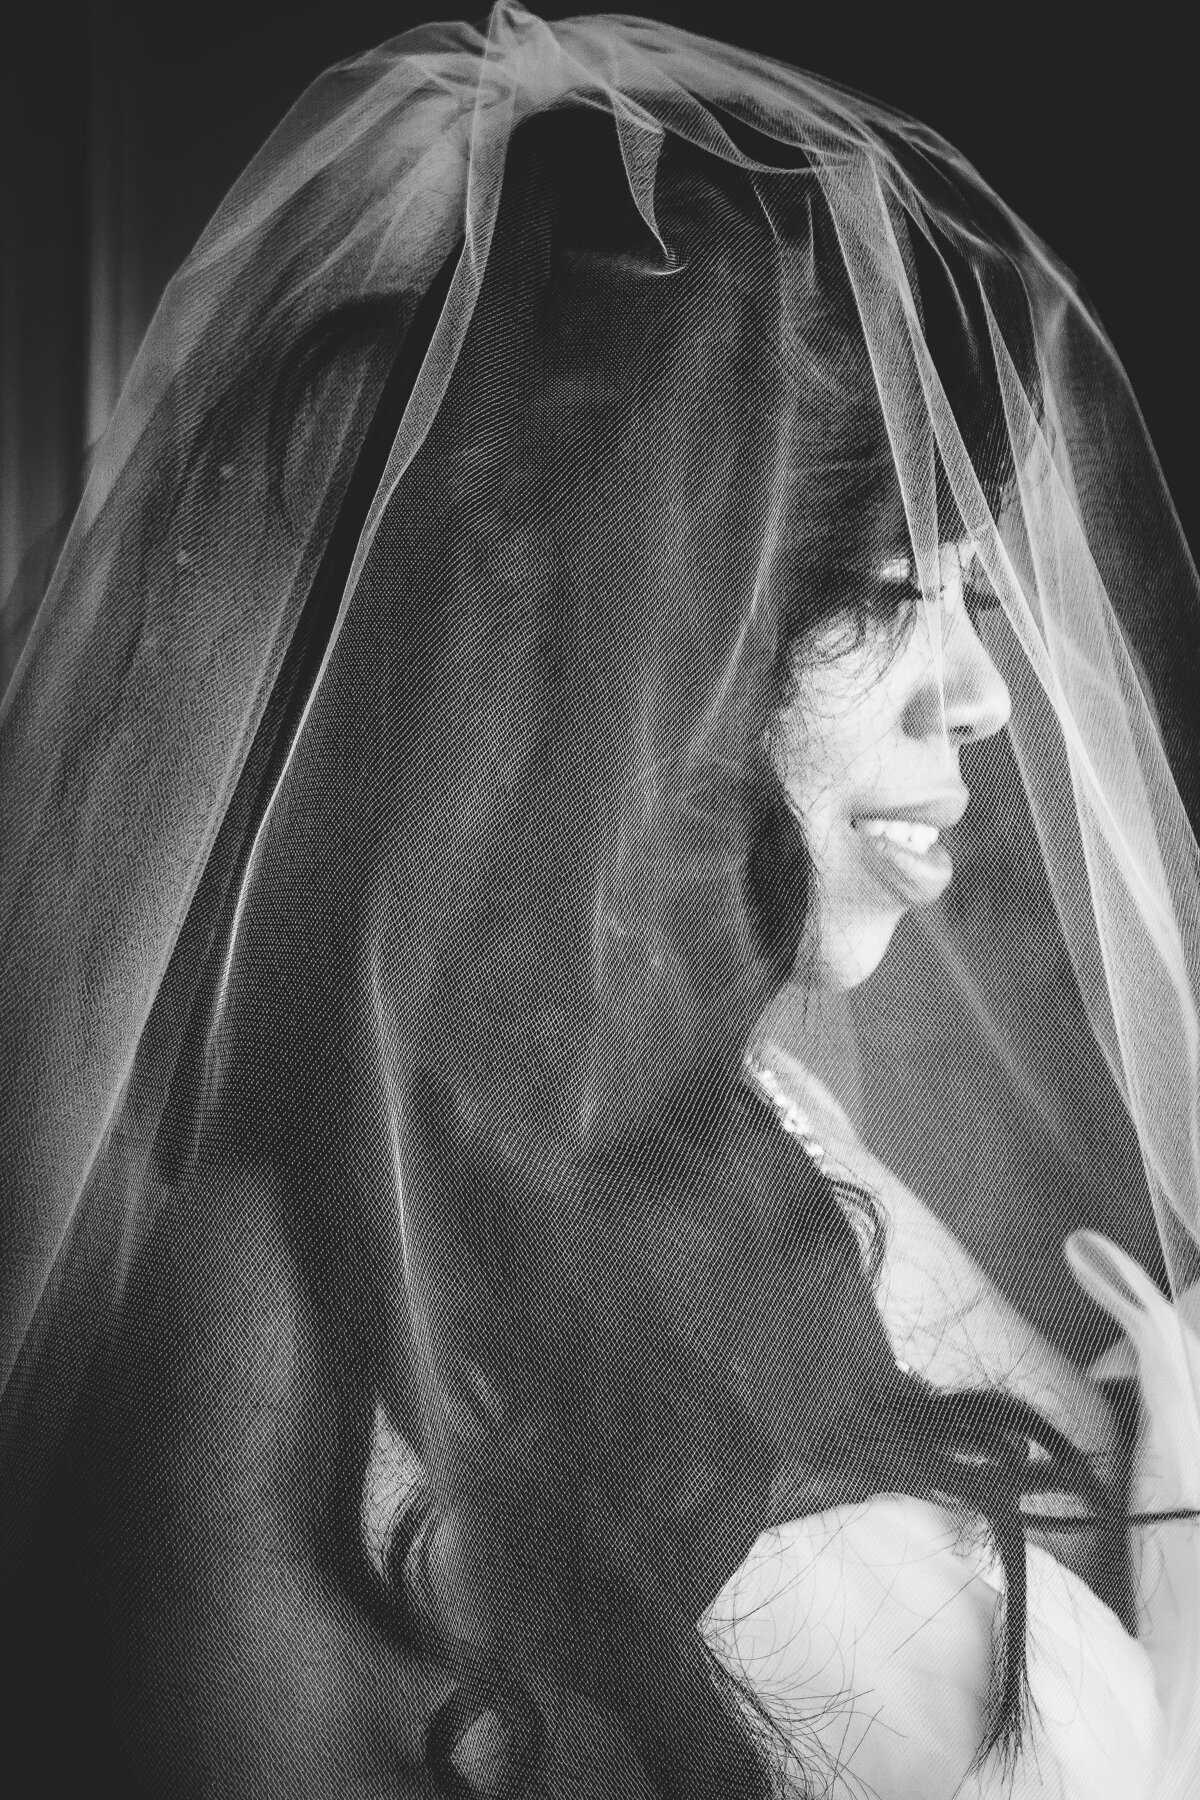 003_ParisWedding_March 06, 2016_PeridotImagery